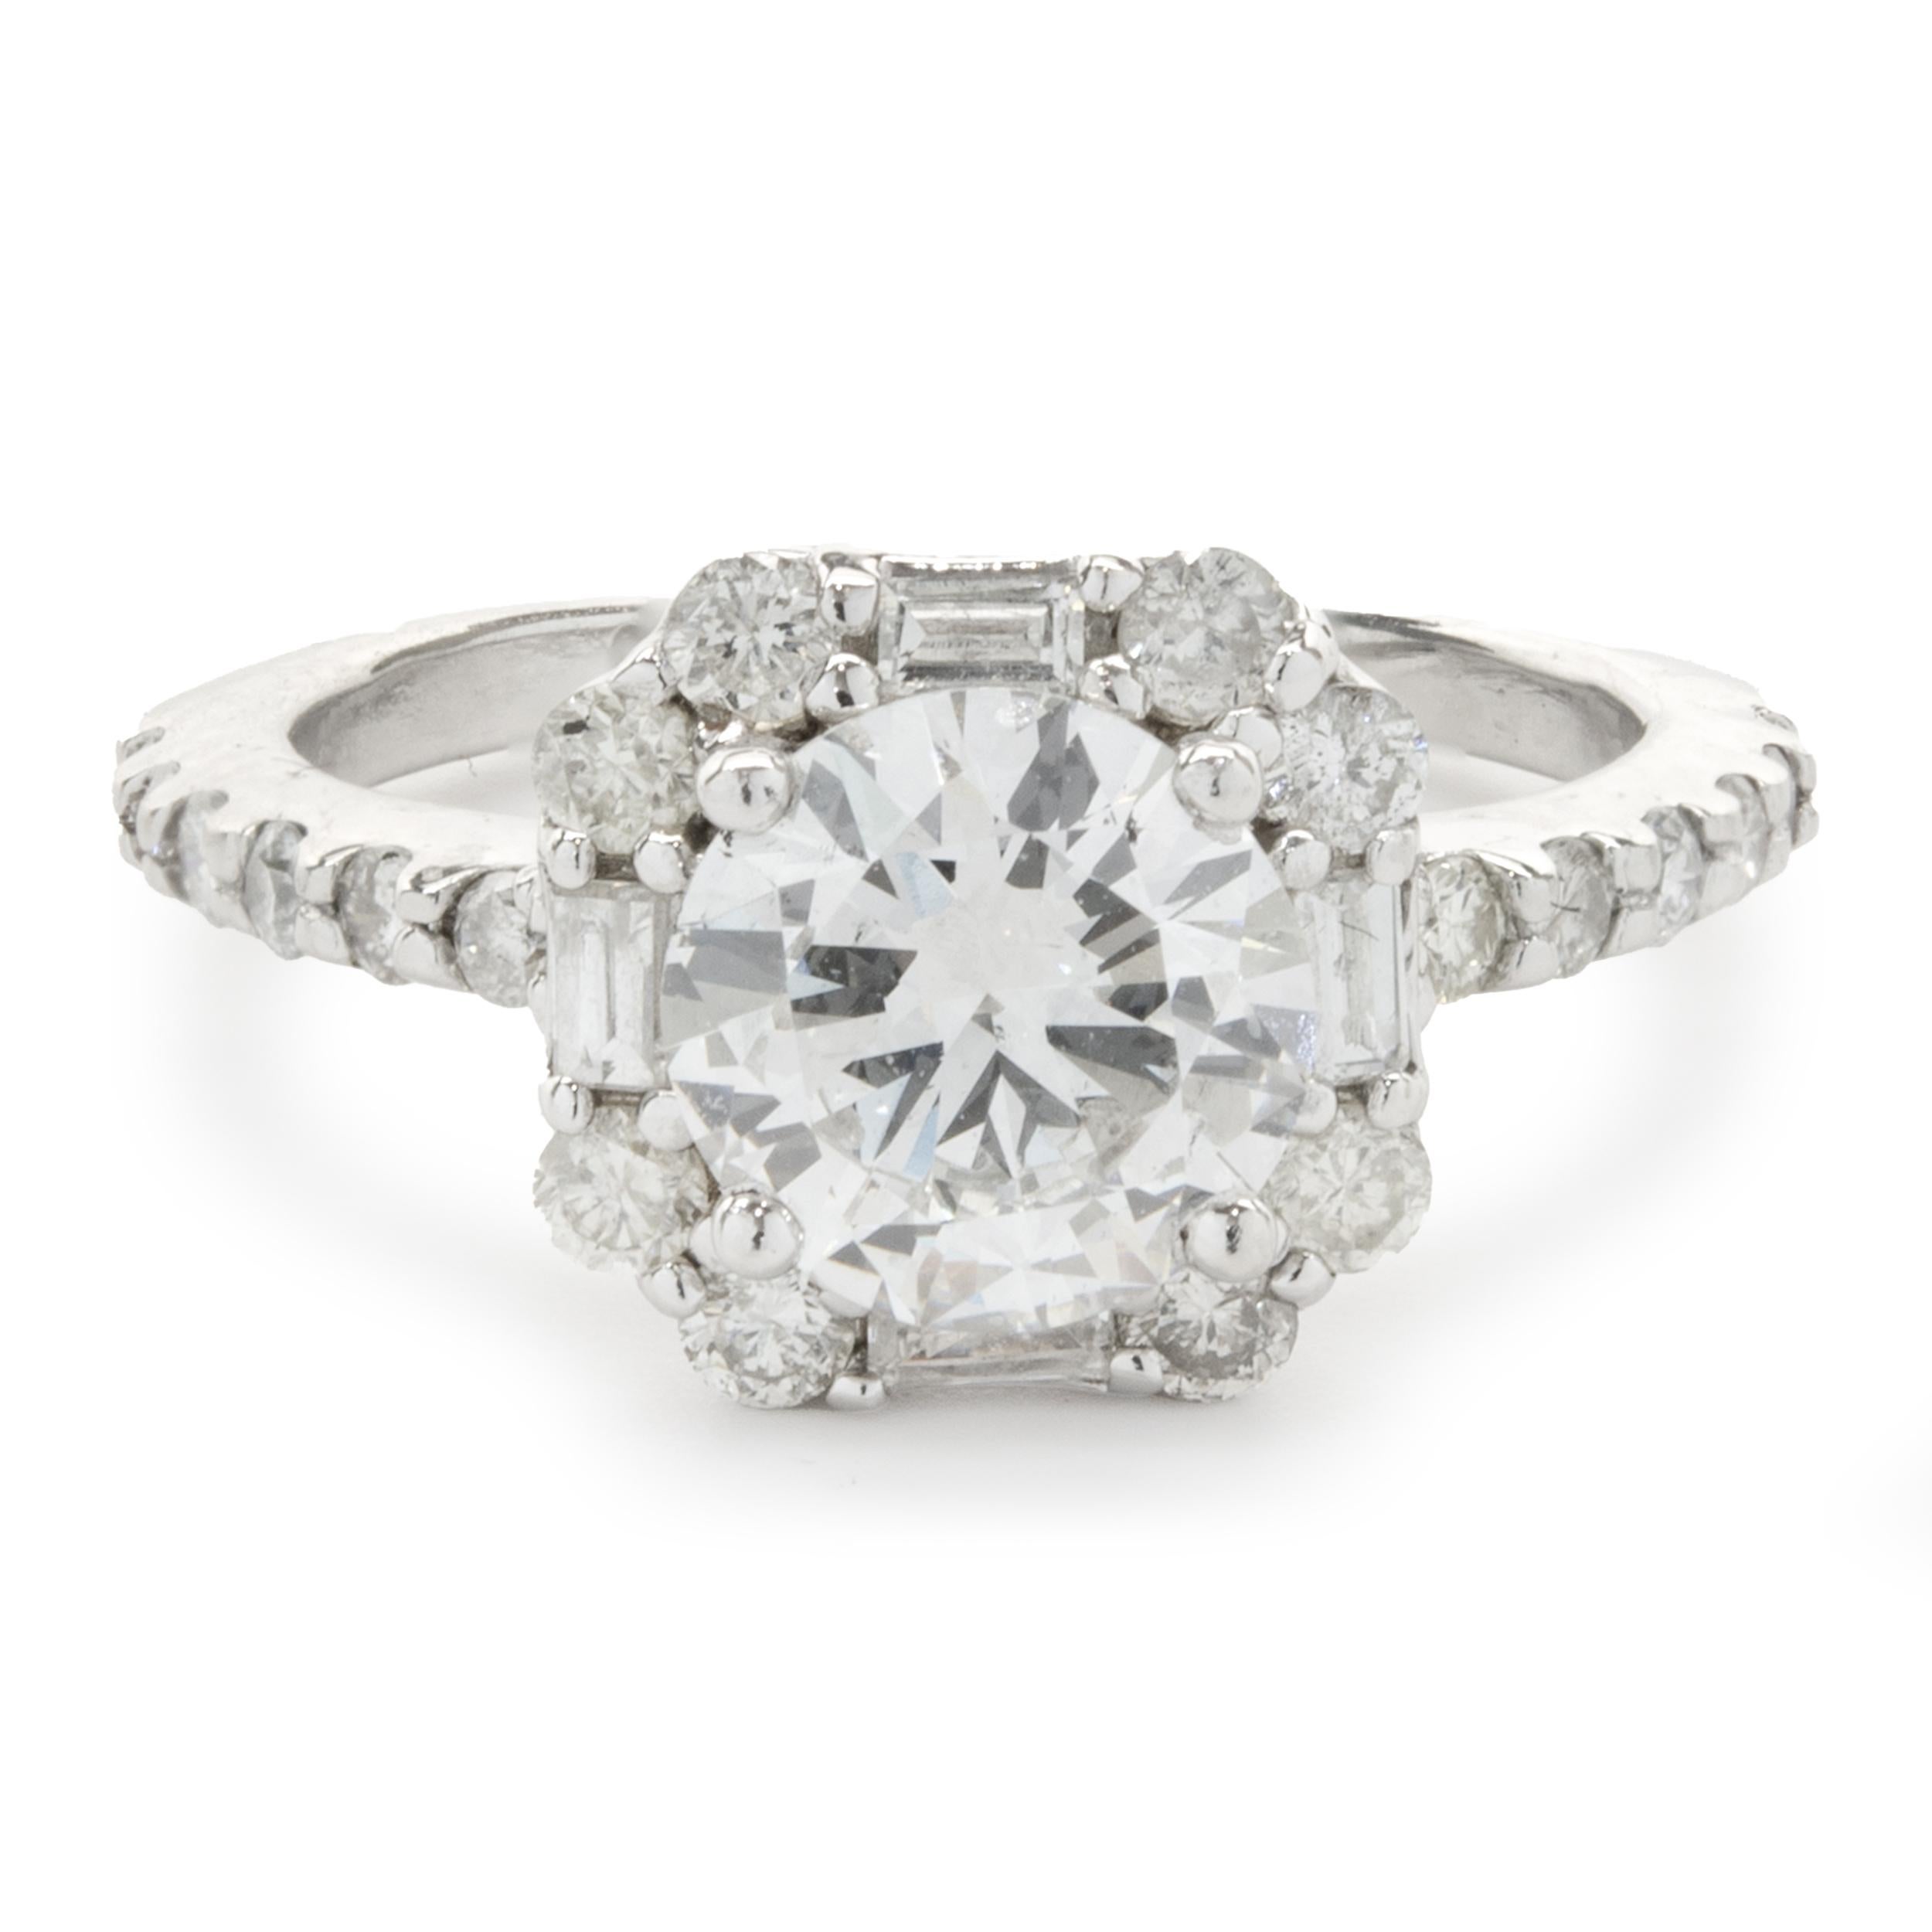 Designer: custom
Material: 14K white gold
Diamond: 1 round brilliant cut = 1.05ct
Color: G
Clarity: SI1
Diamond: 20 round brilliant cut & 4 baguette cut = .32cttw
Color: H
Clarity: SI1
Ring Size: 4 (please allow up to 2 additional business days for